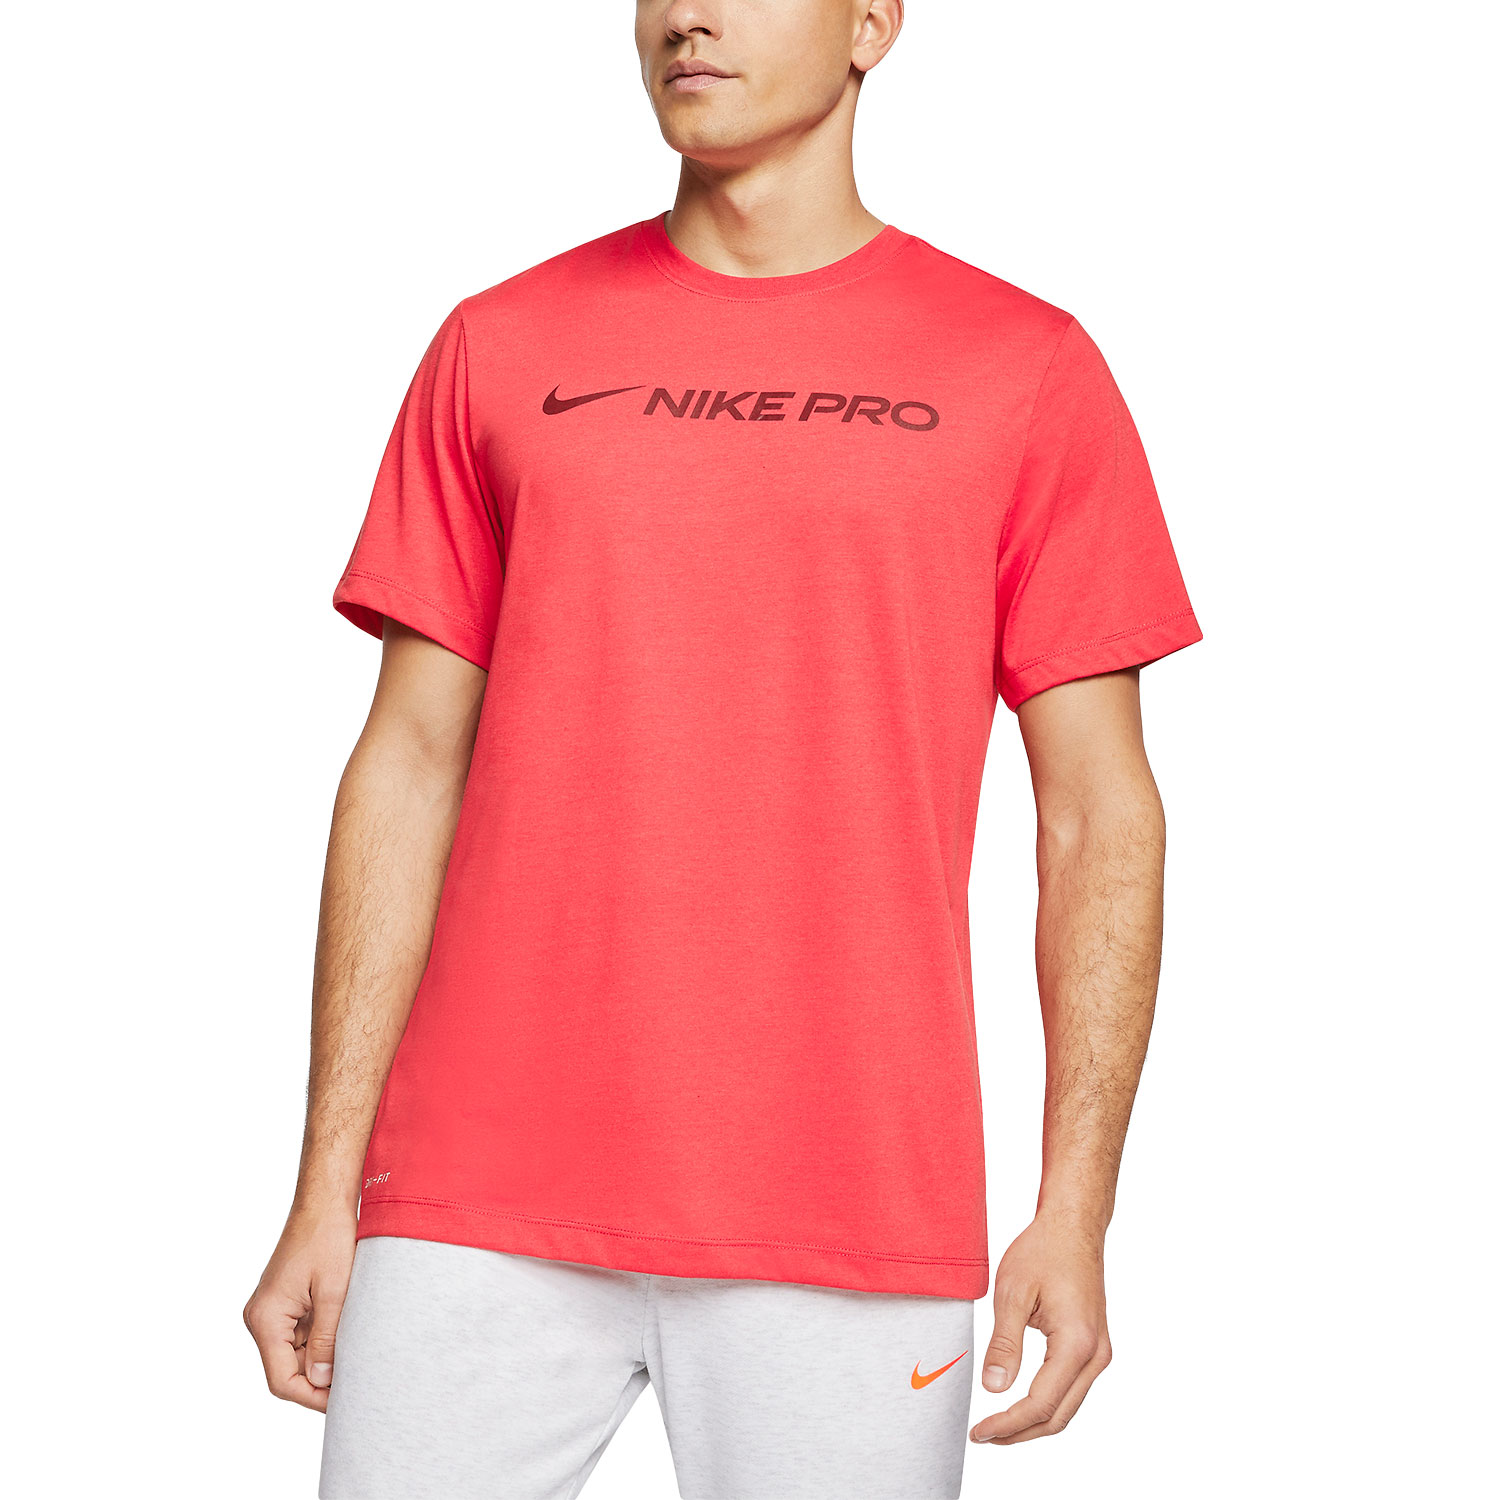 Nike Pro Dry Men's Training T-Shirt - Track Red/Team Red